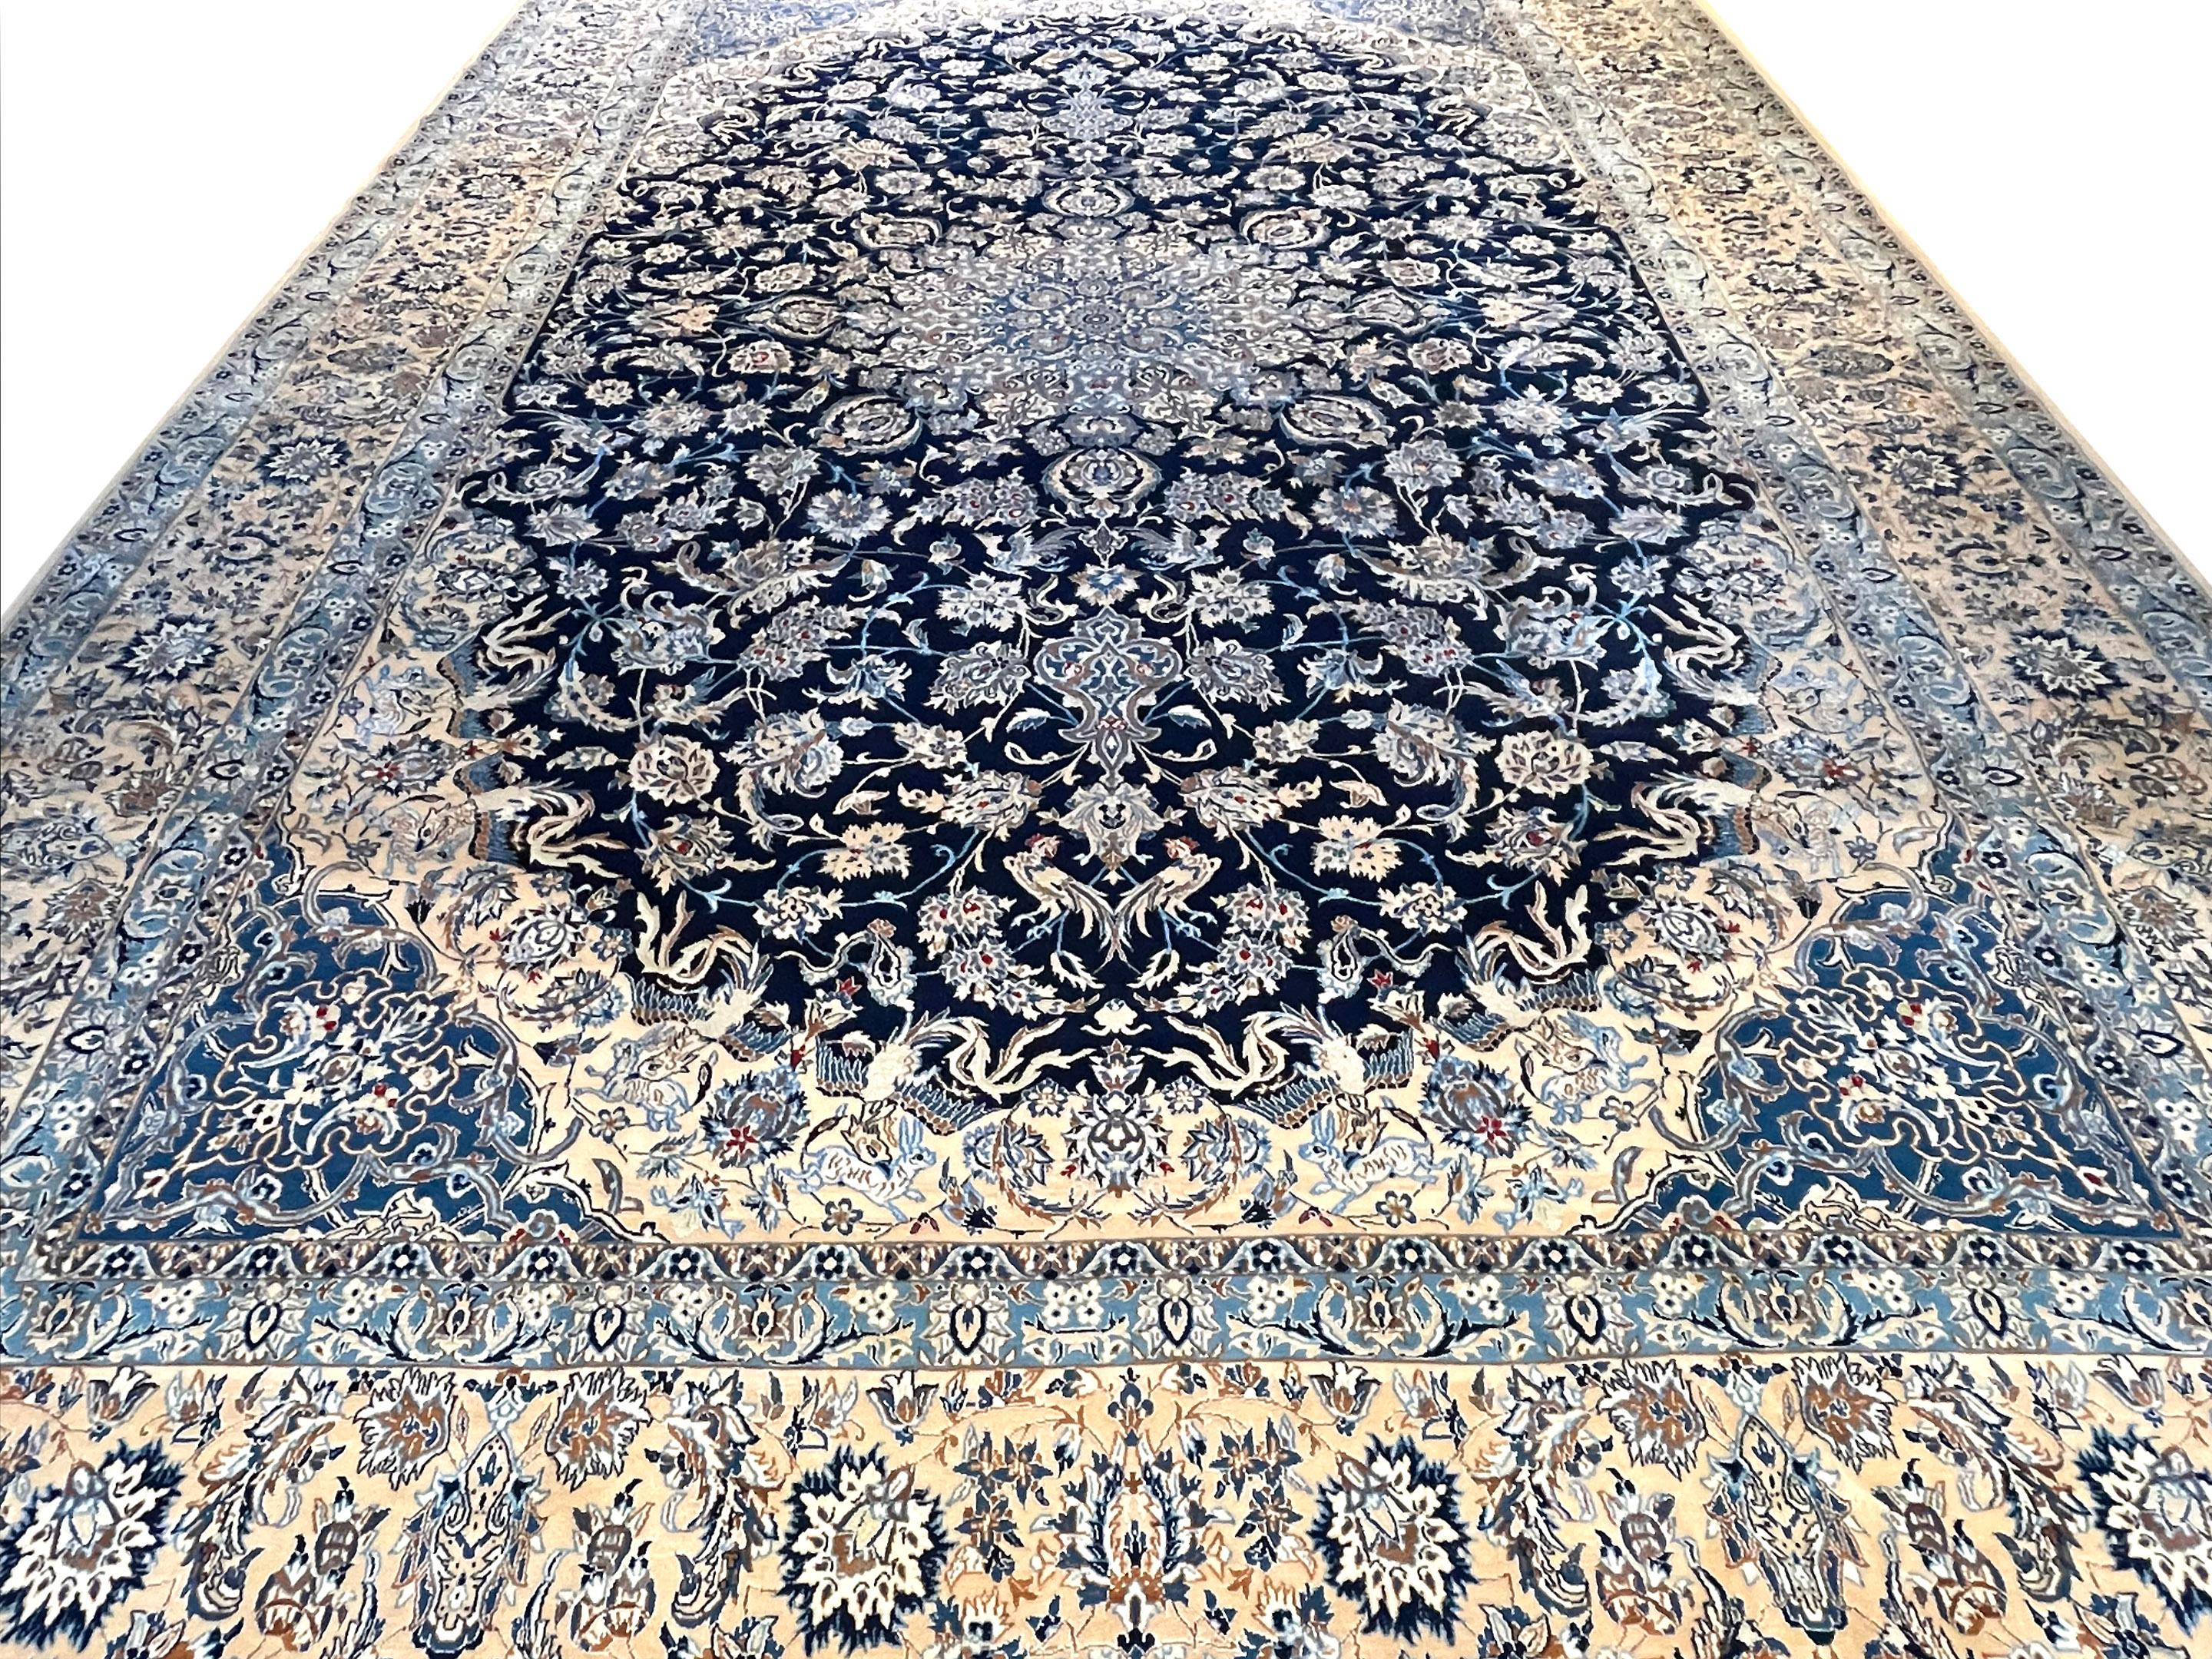 This authentic Persian round hand-made Nain 9 LAA has high quality wool and silk pile with cotton foundation, which silk highlights the detail in the design and it has signed by Habibian. (Each thread of the warp is made up of three threads, which